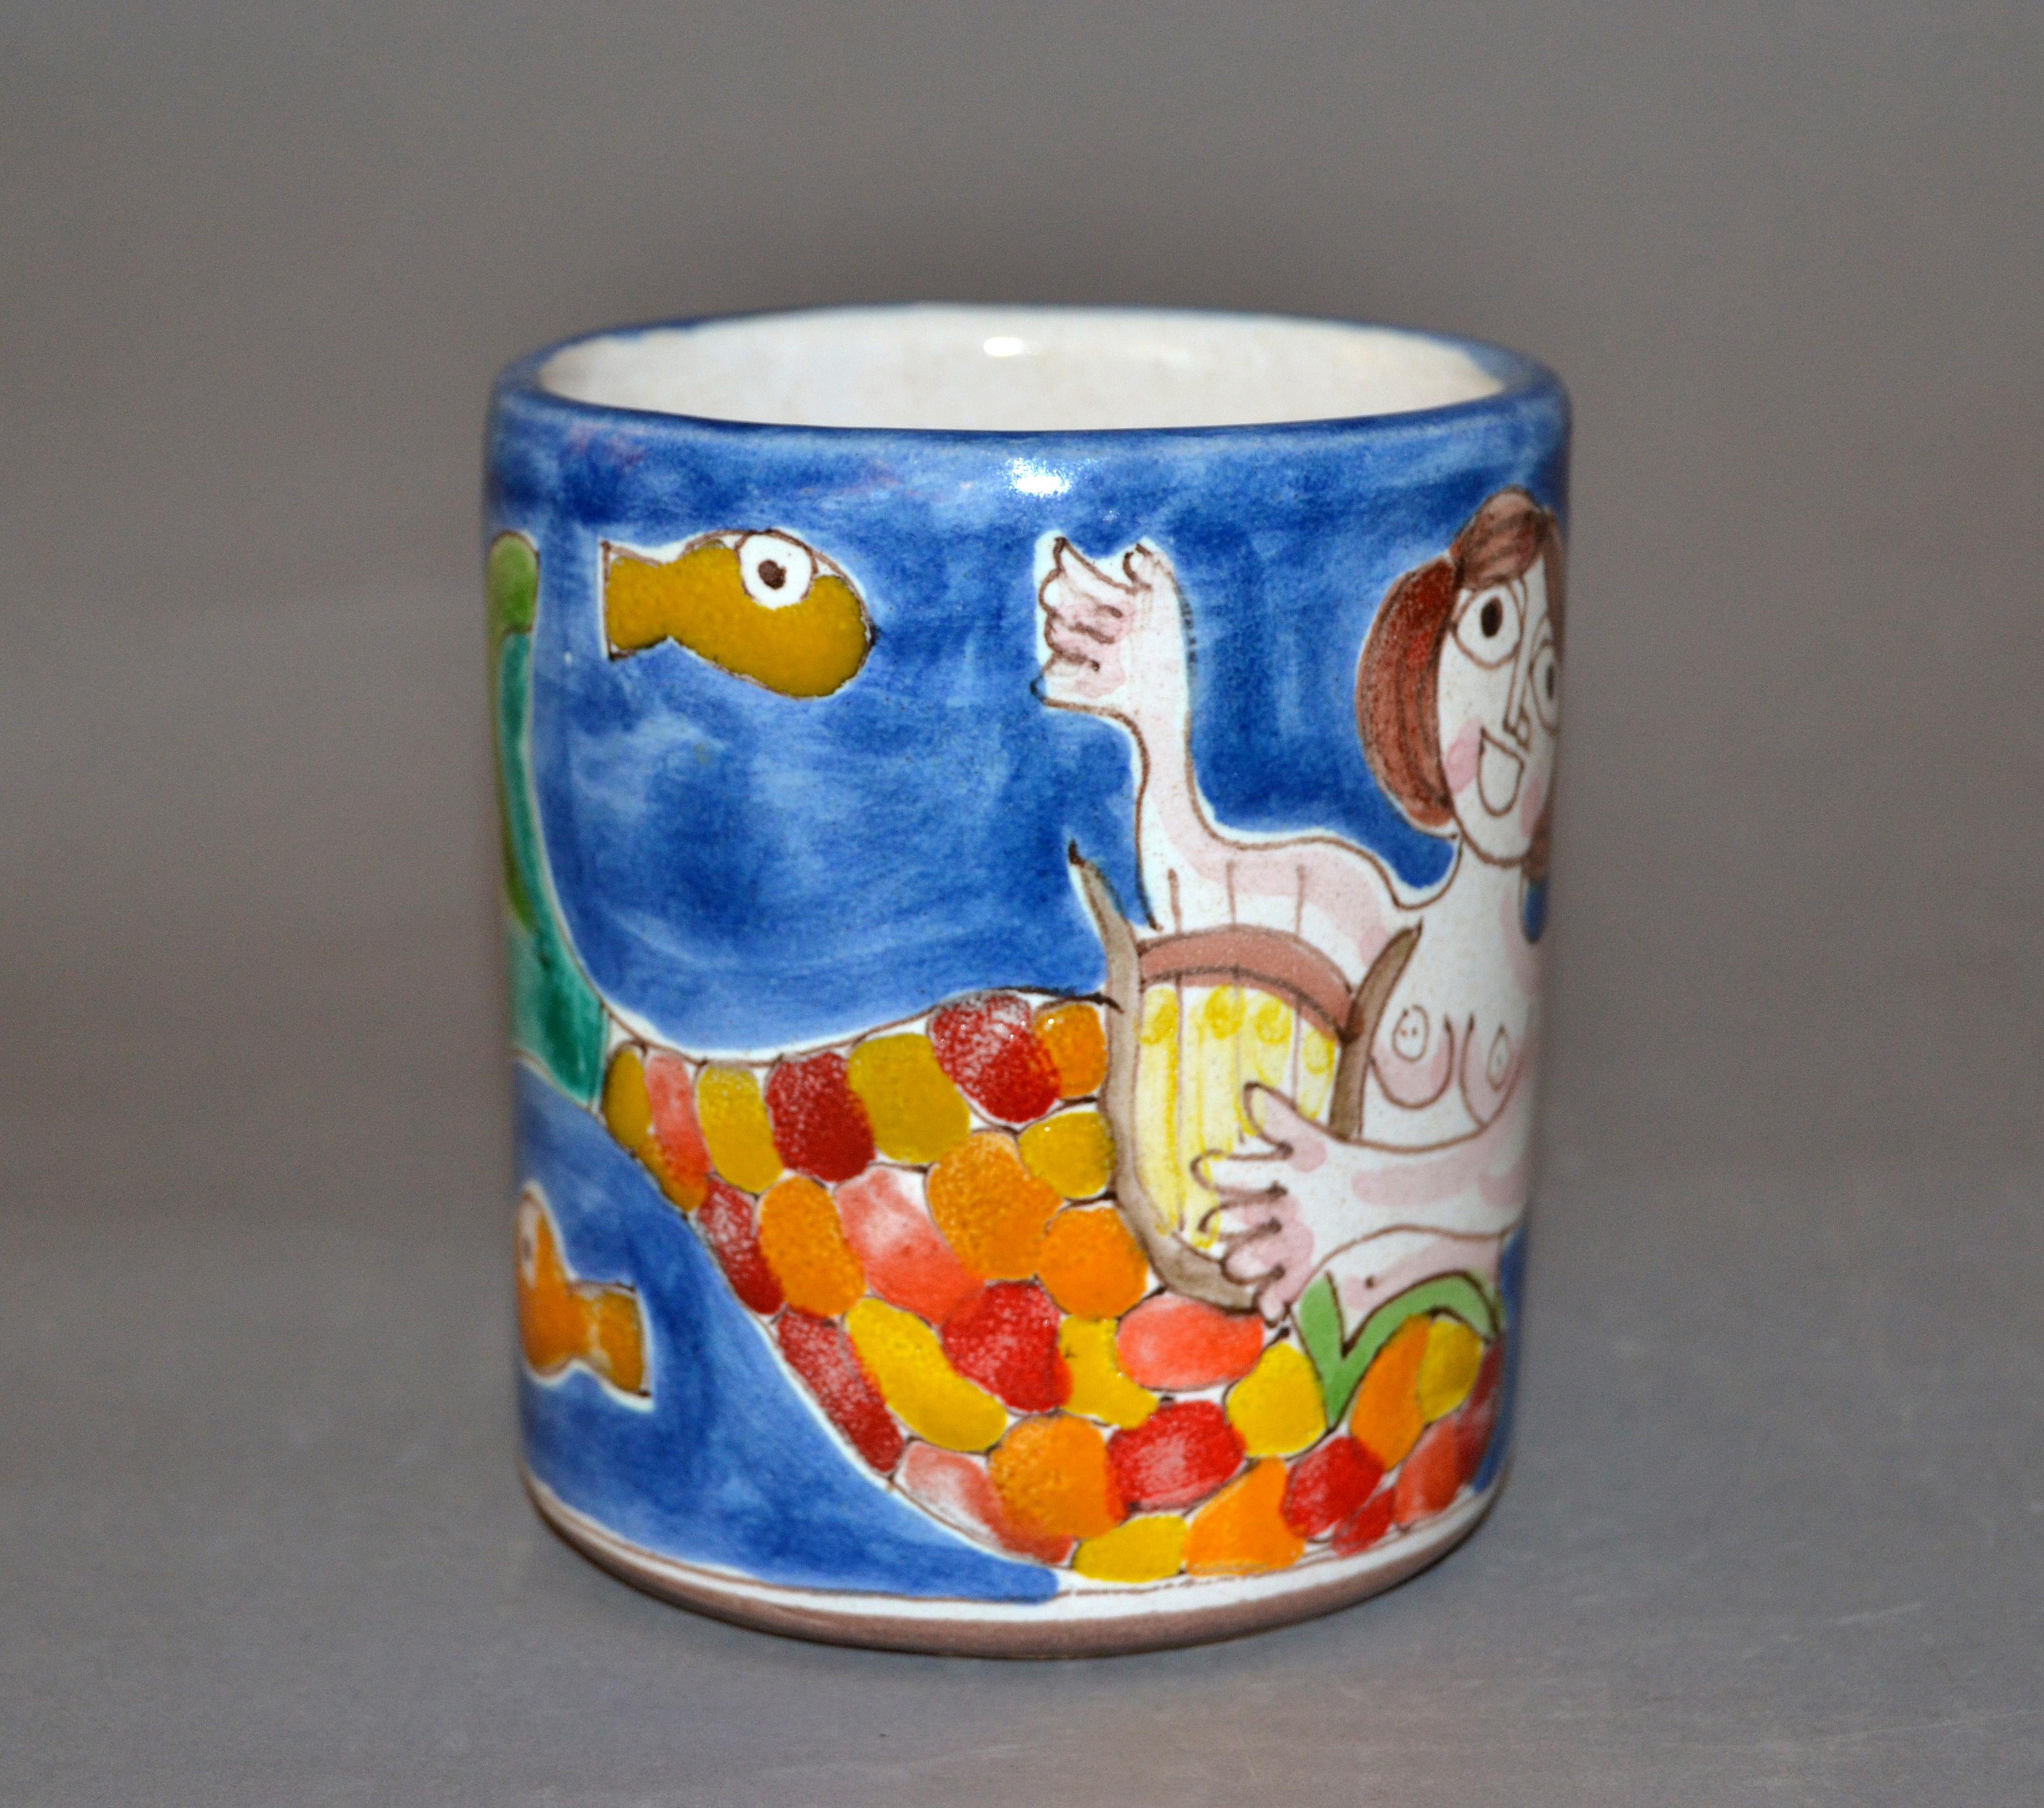 Original Italian Giovanni Desimone hand painted art pottery, decor mug or cup with a scene of a beautiful Mermaid playing the Harp surrounded by Fish.
The mug is glazed and very colorful.
DeSimone Mark and numbered on underside, 'Desimone, Italy